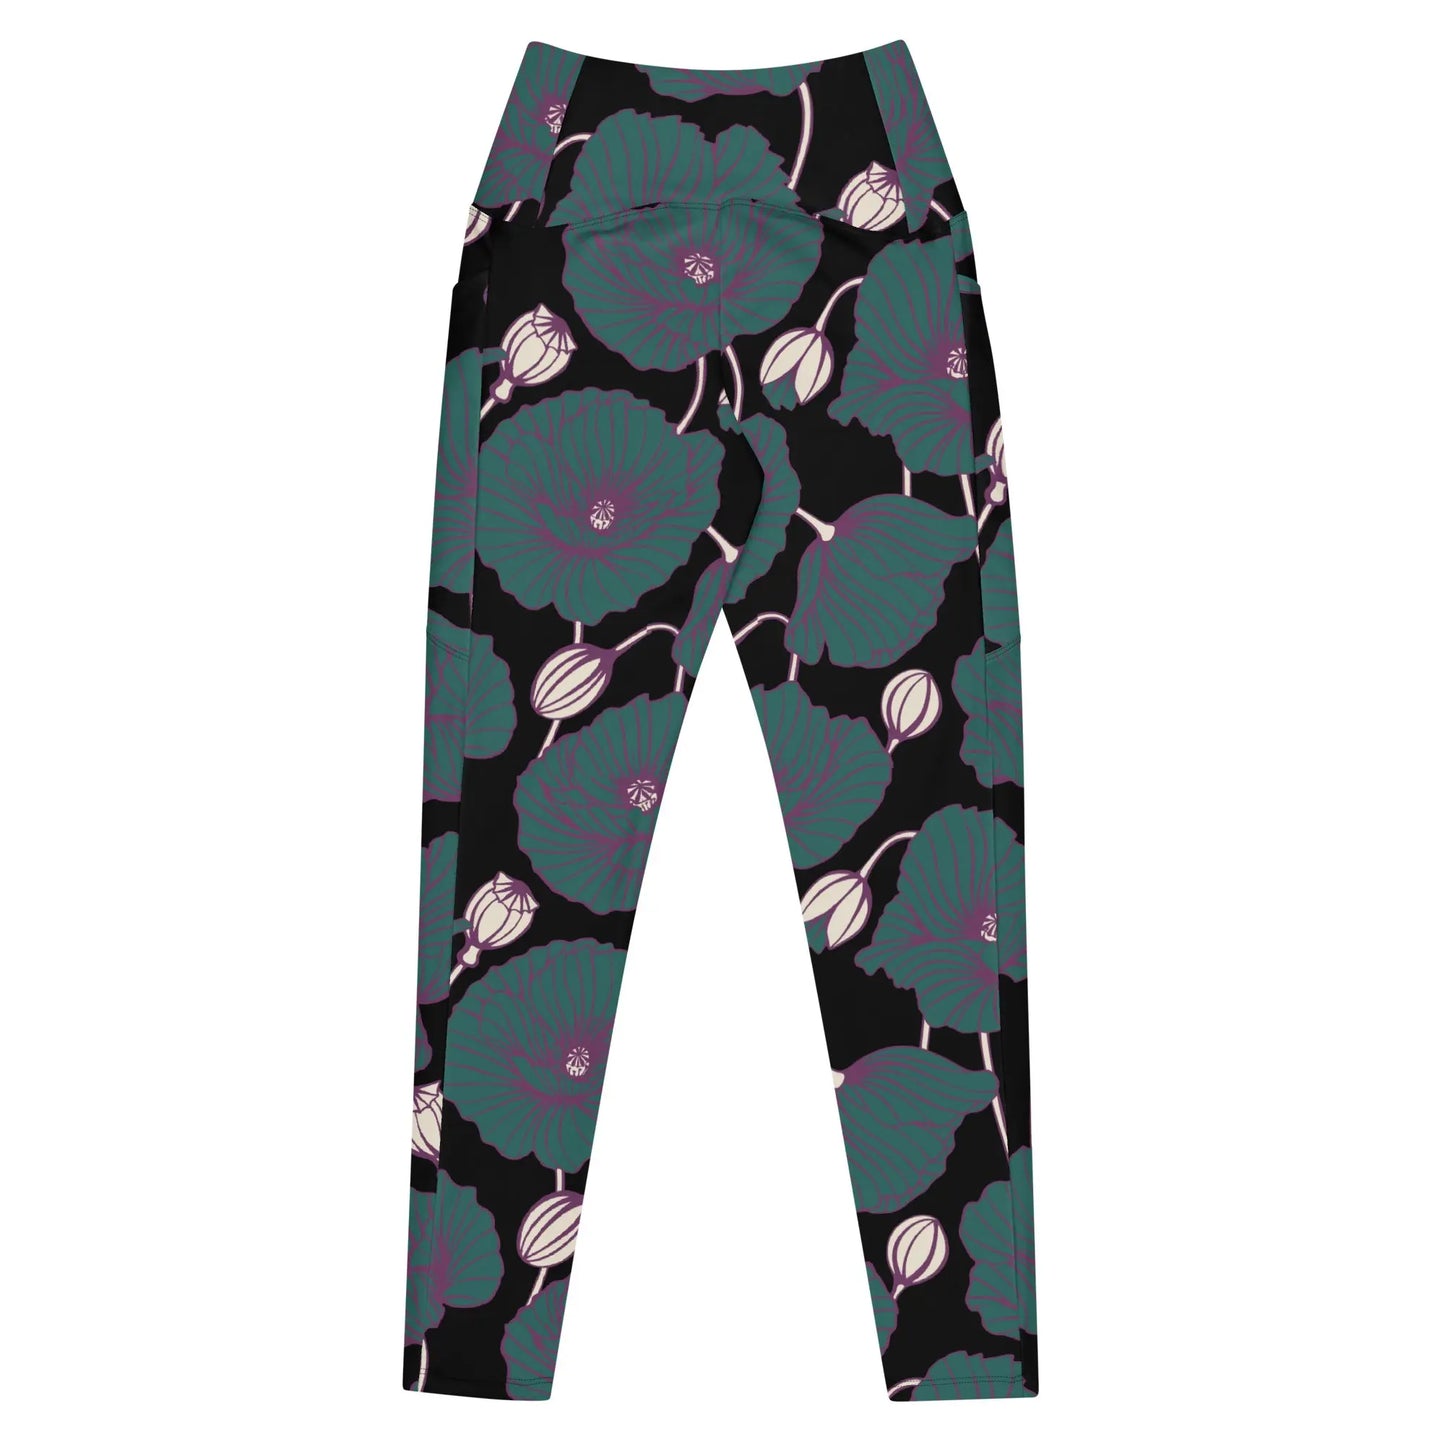 Poppy Printed Leggings with Pockets Ellie Day Activewear